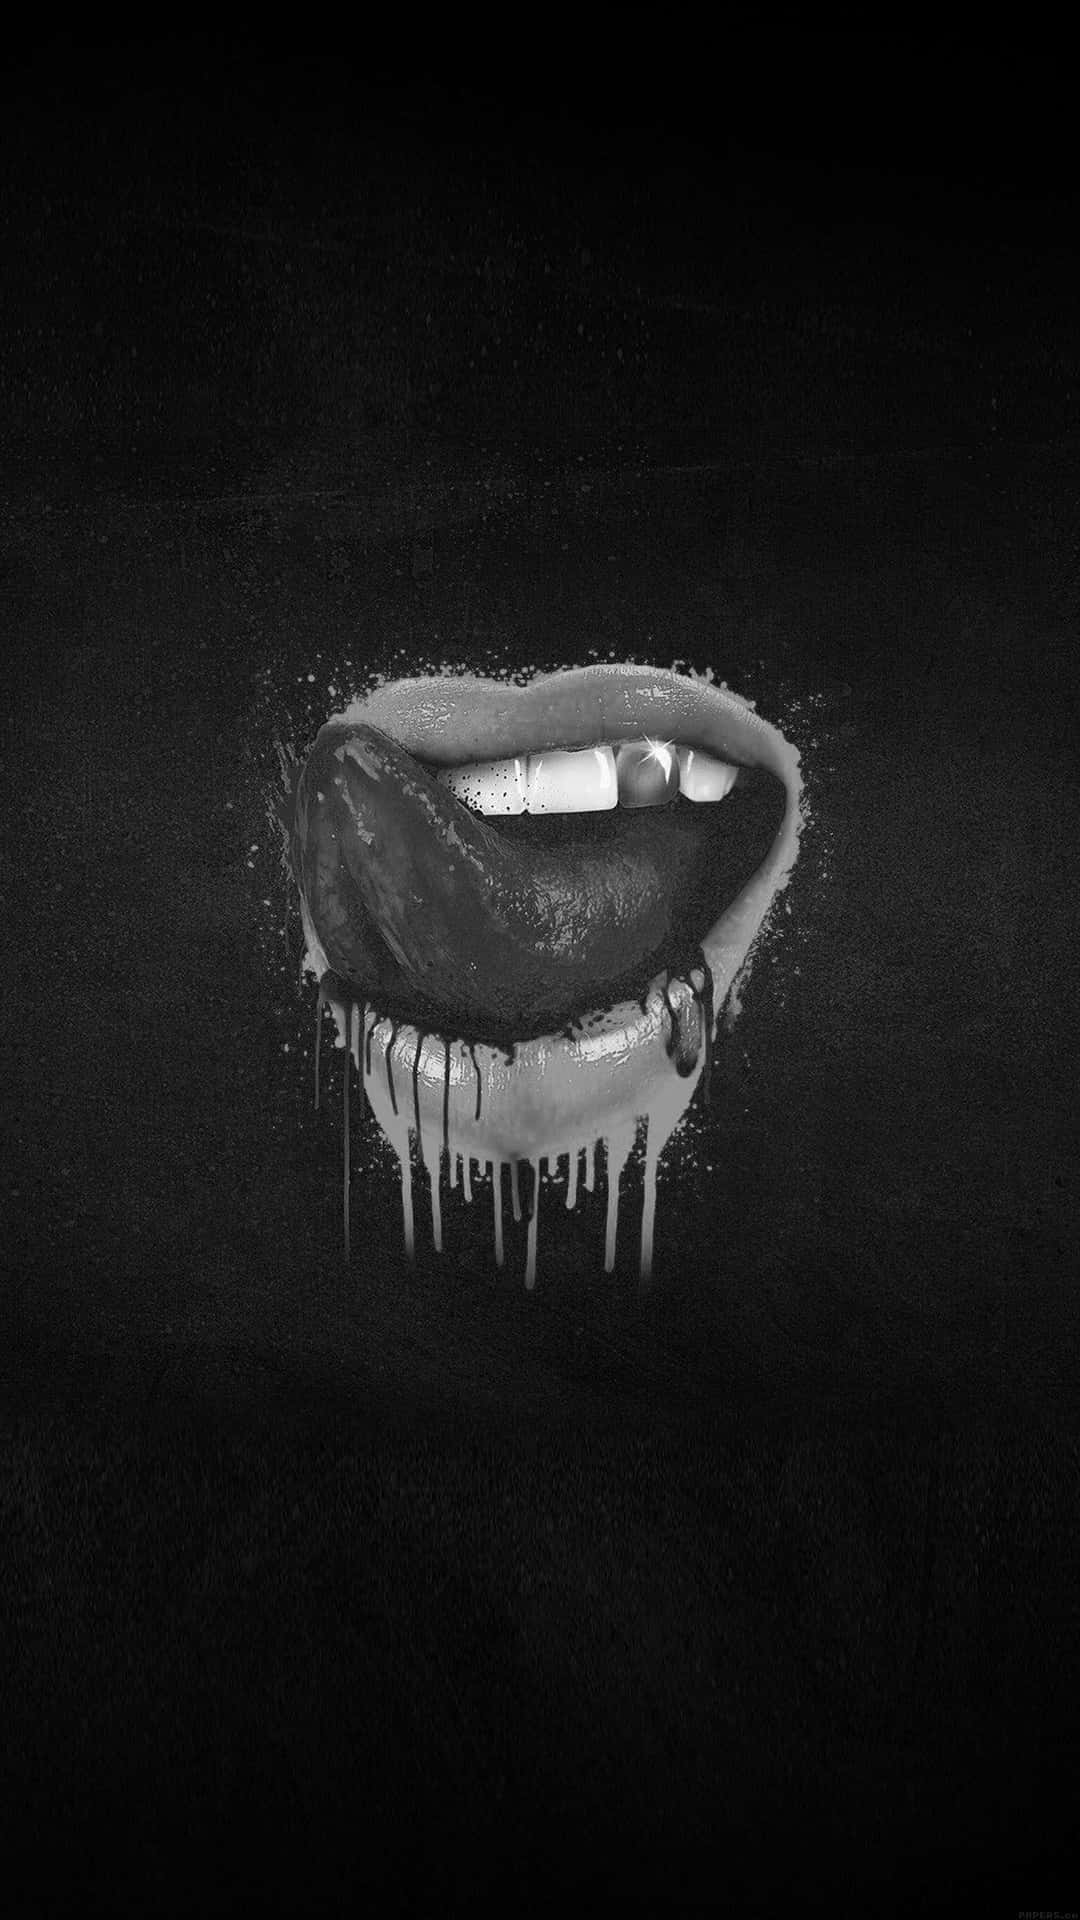 A Black And White Image Of A Mouth With Dripping Dripping Background